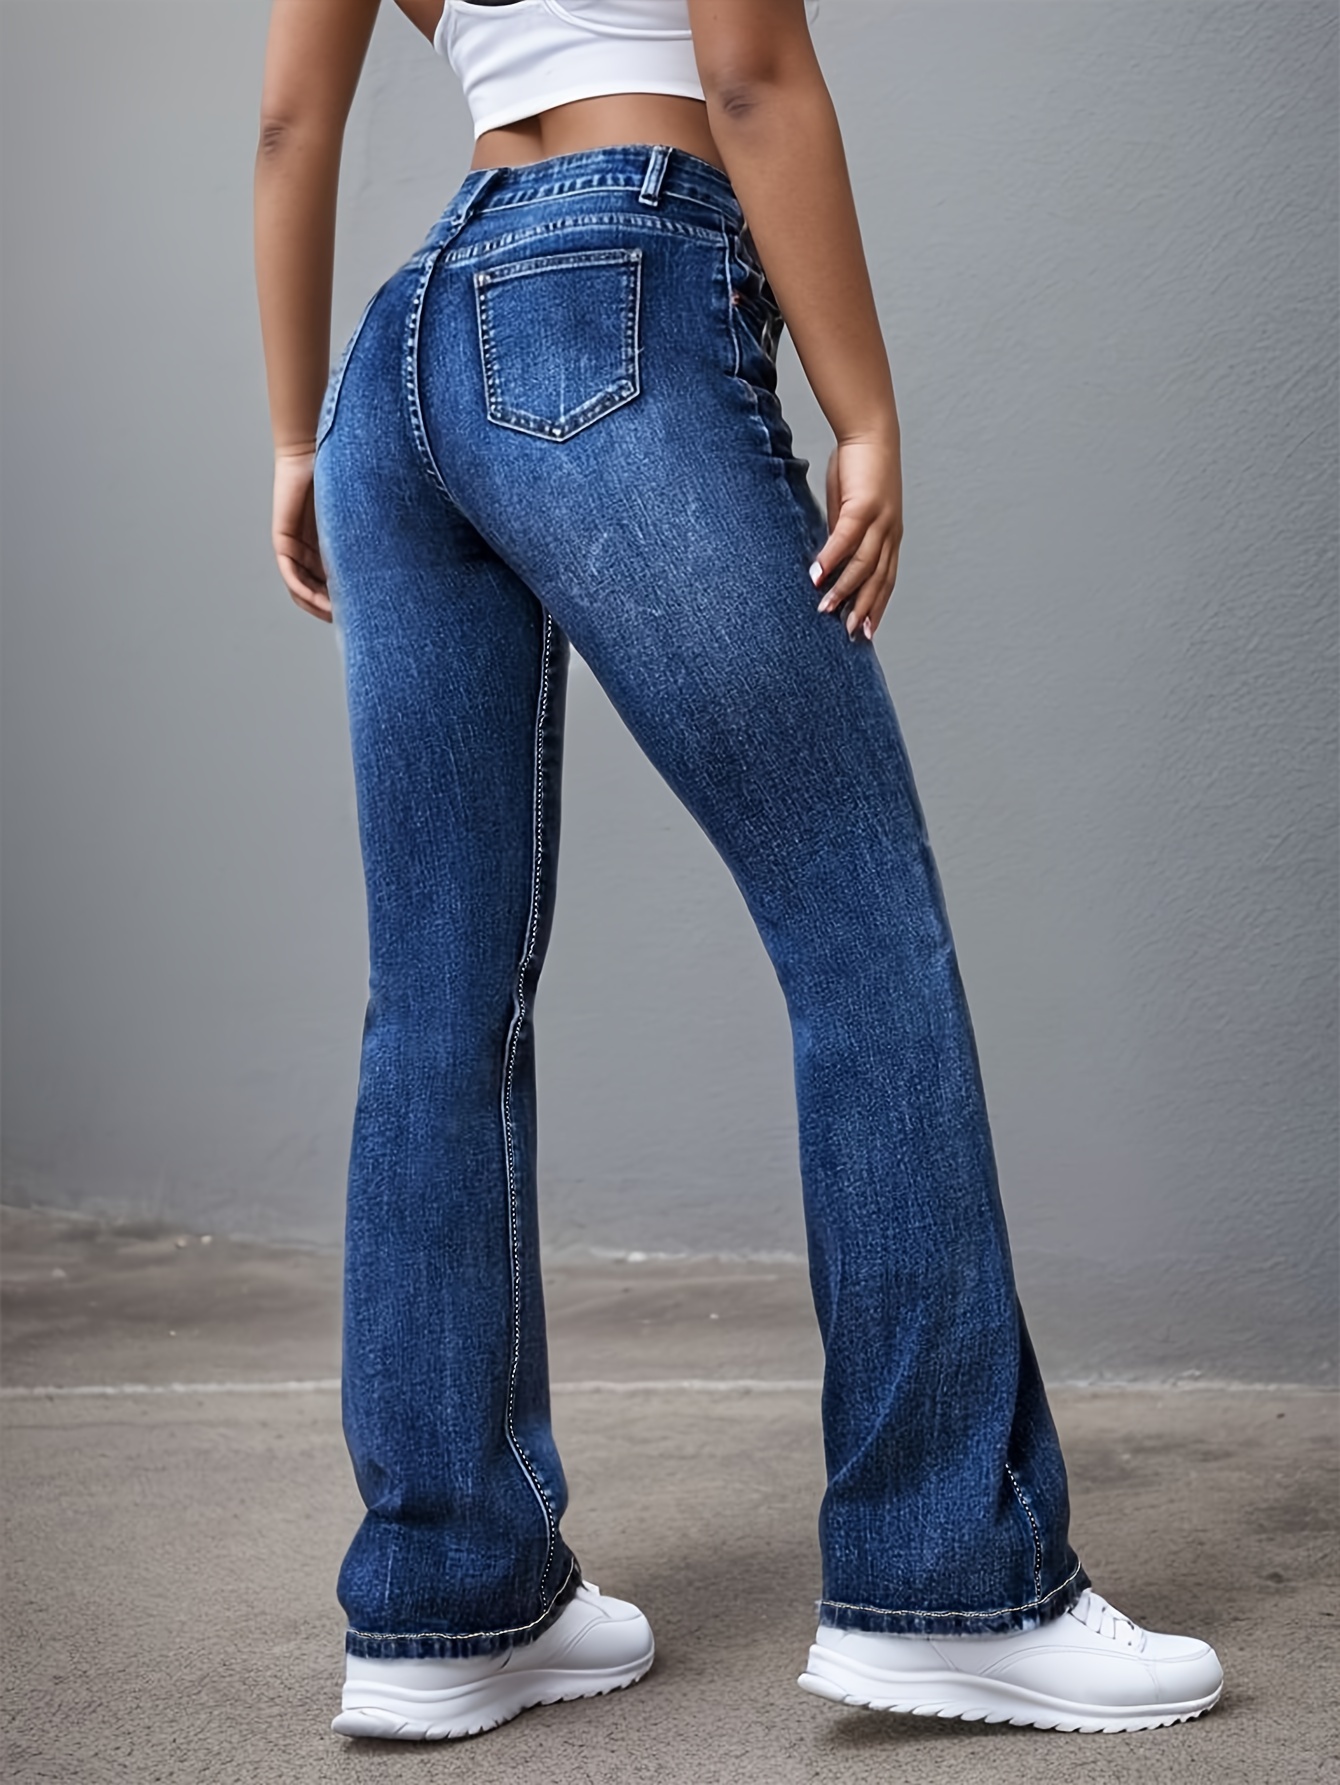 blue water ripple embossed flare jeans, high waist high stretch washed denim trousers, women's denim jeans & clothing deep blue 3